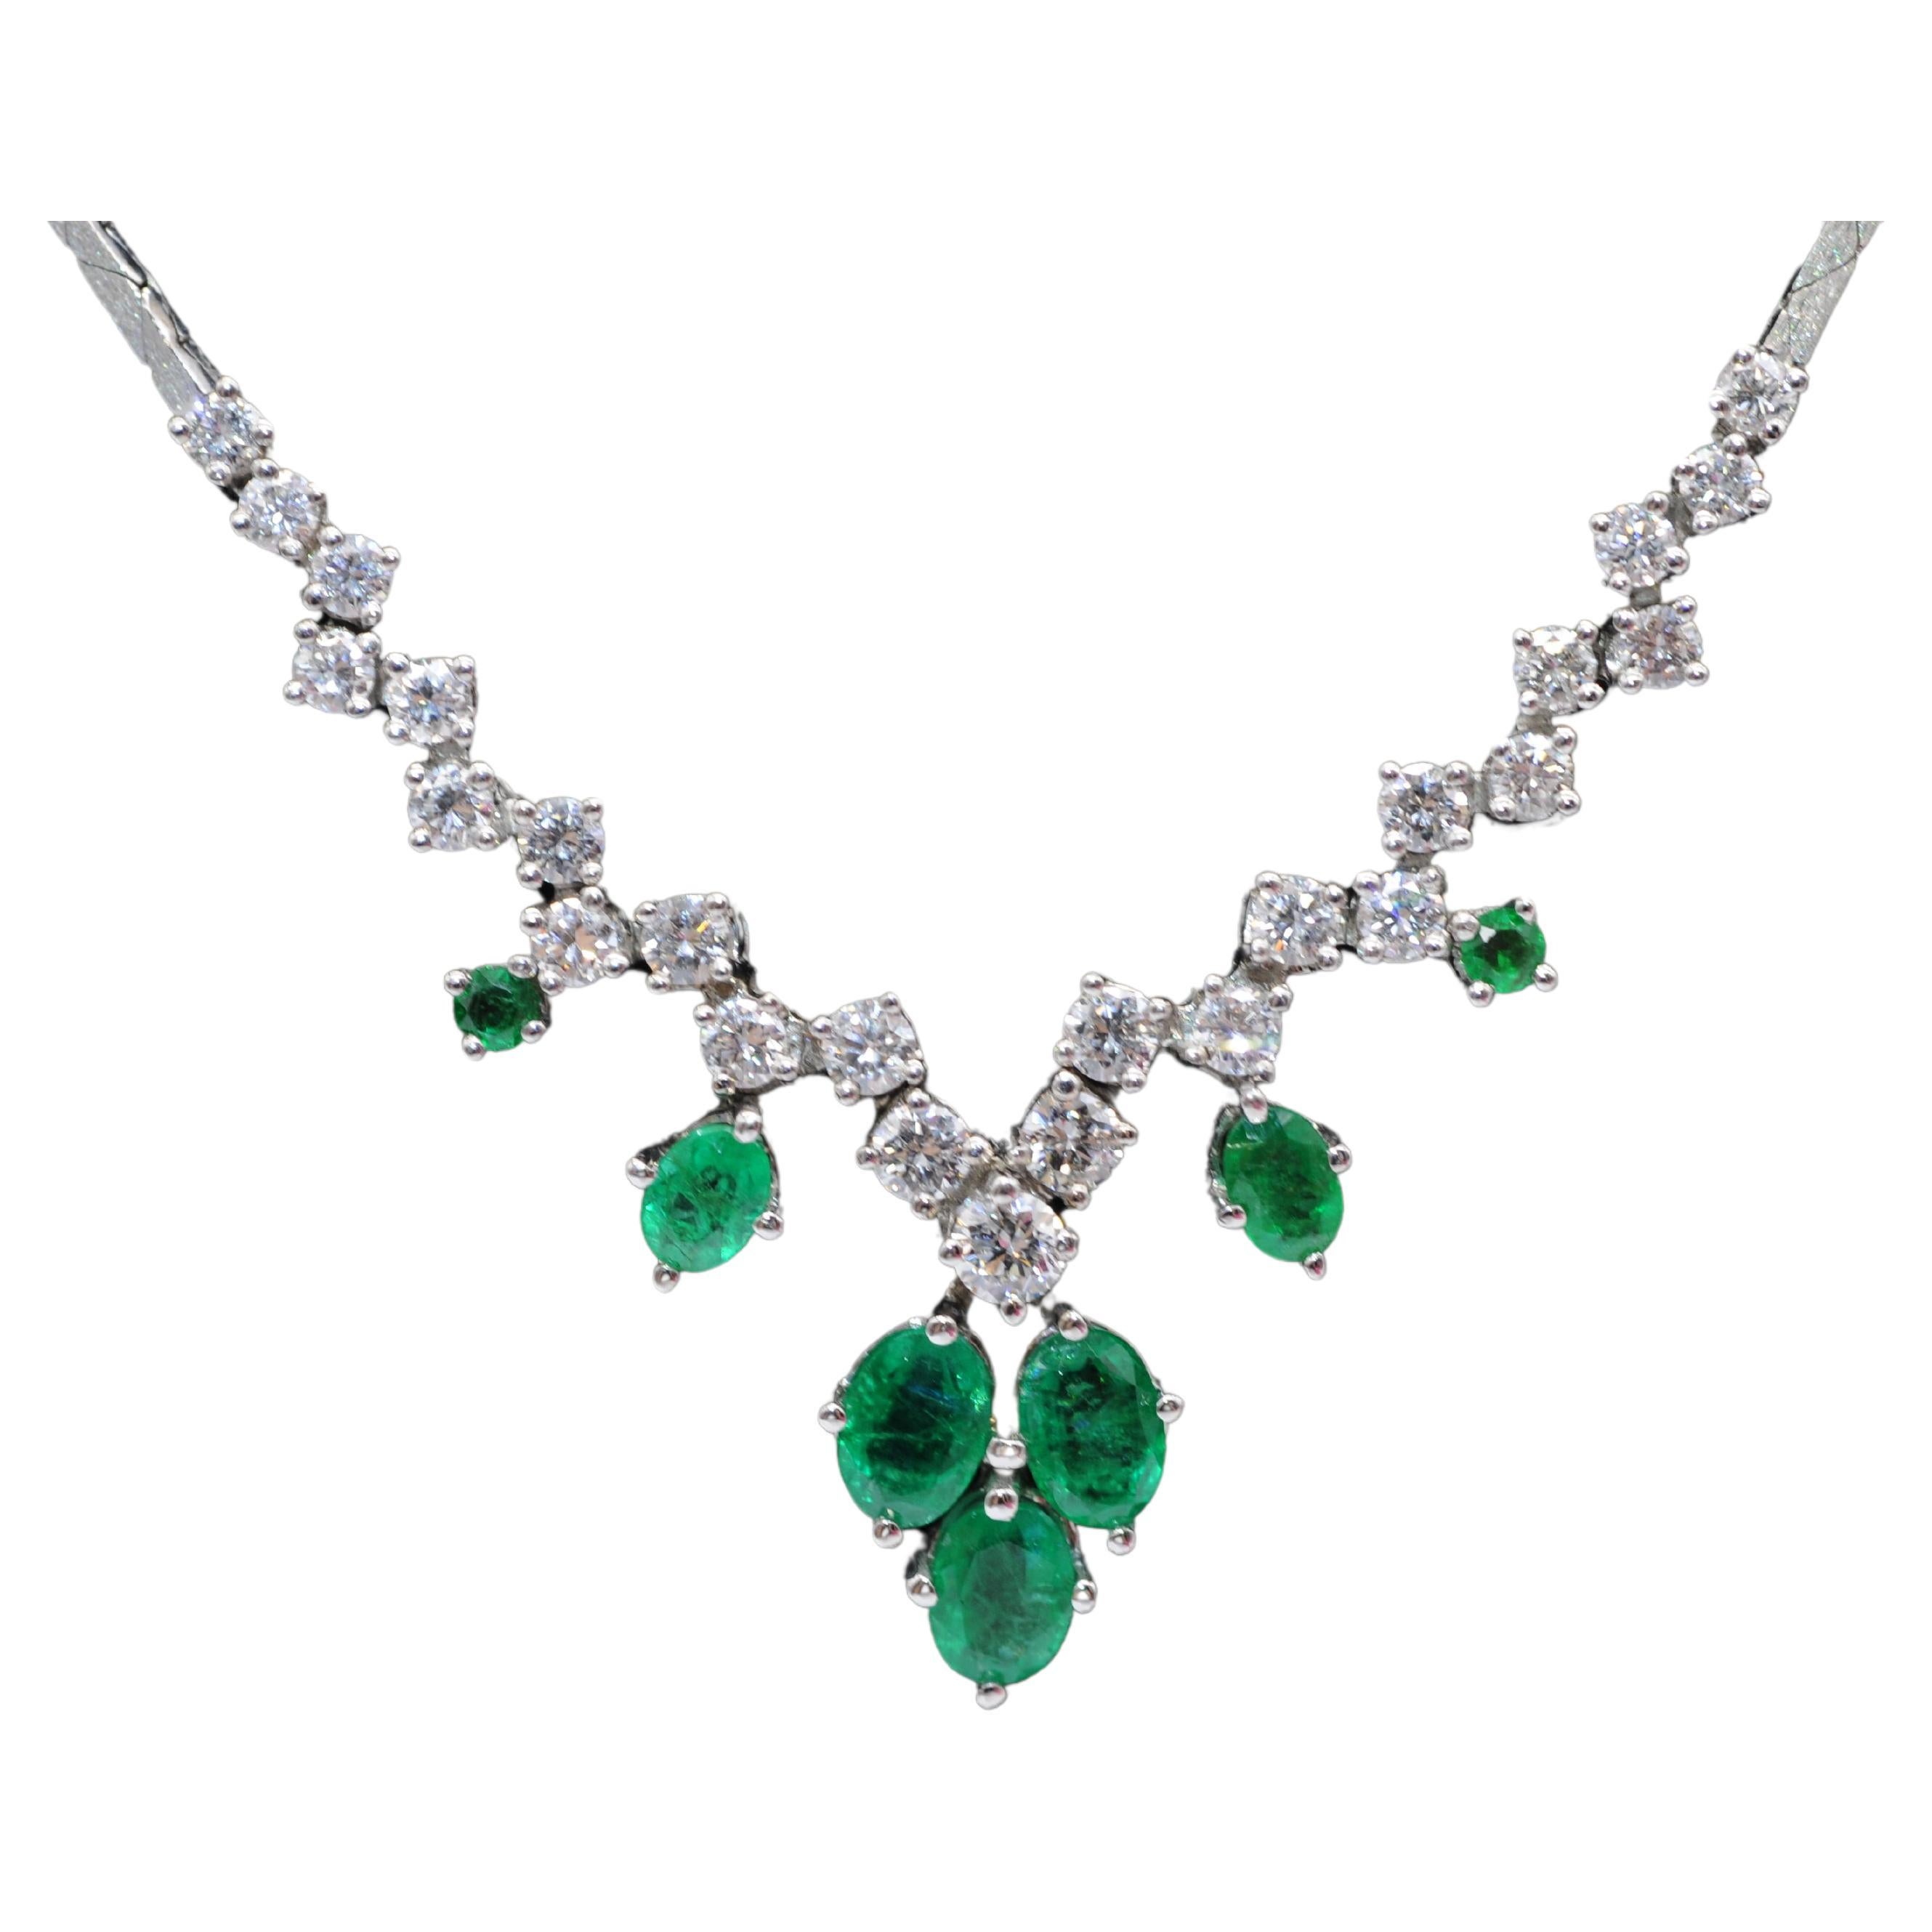 Exquisite 18k White Gold Necklace emeralds and diamonds For Sale 6